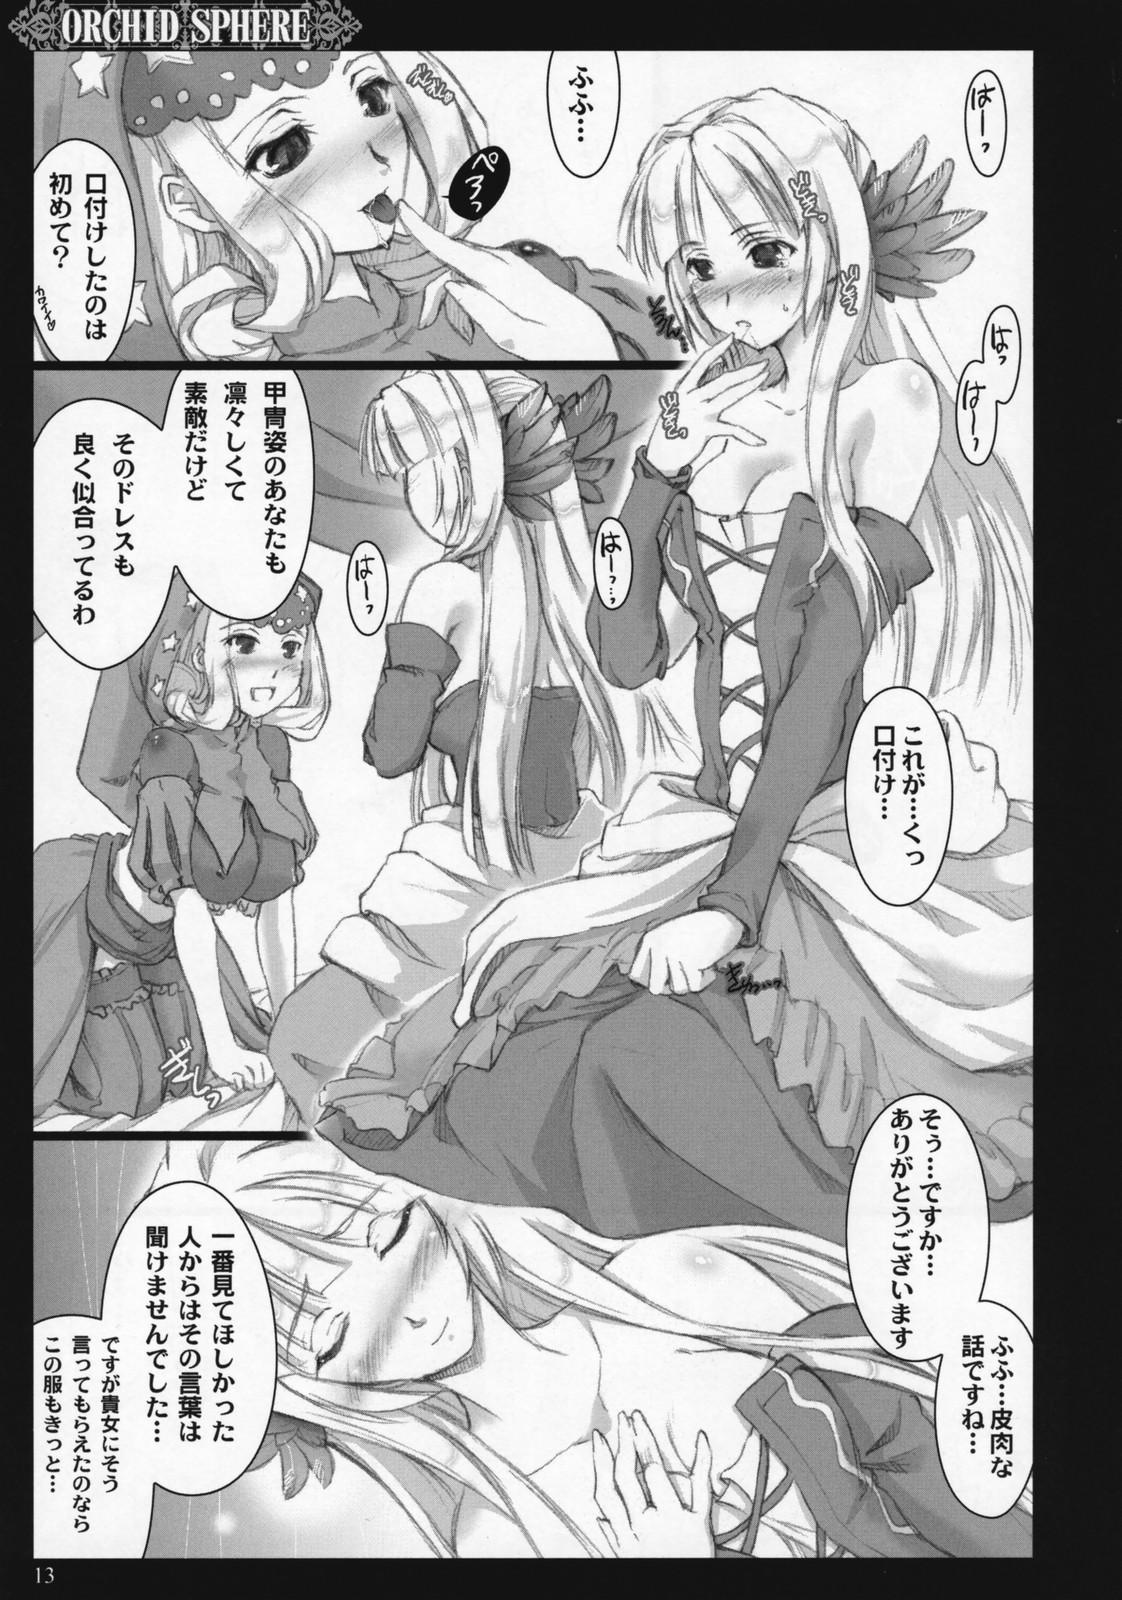 Bailando Orchid Sphere - Odin sphere Highheels - Page 12